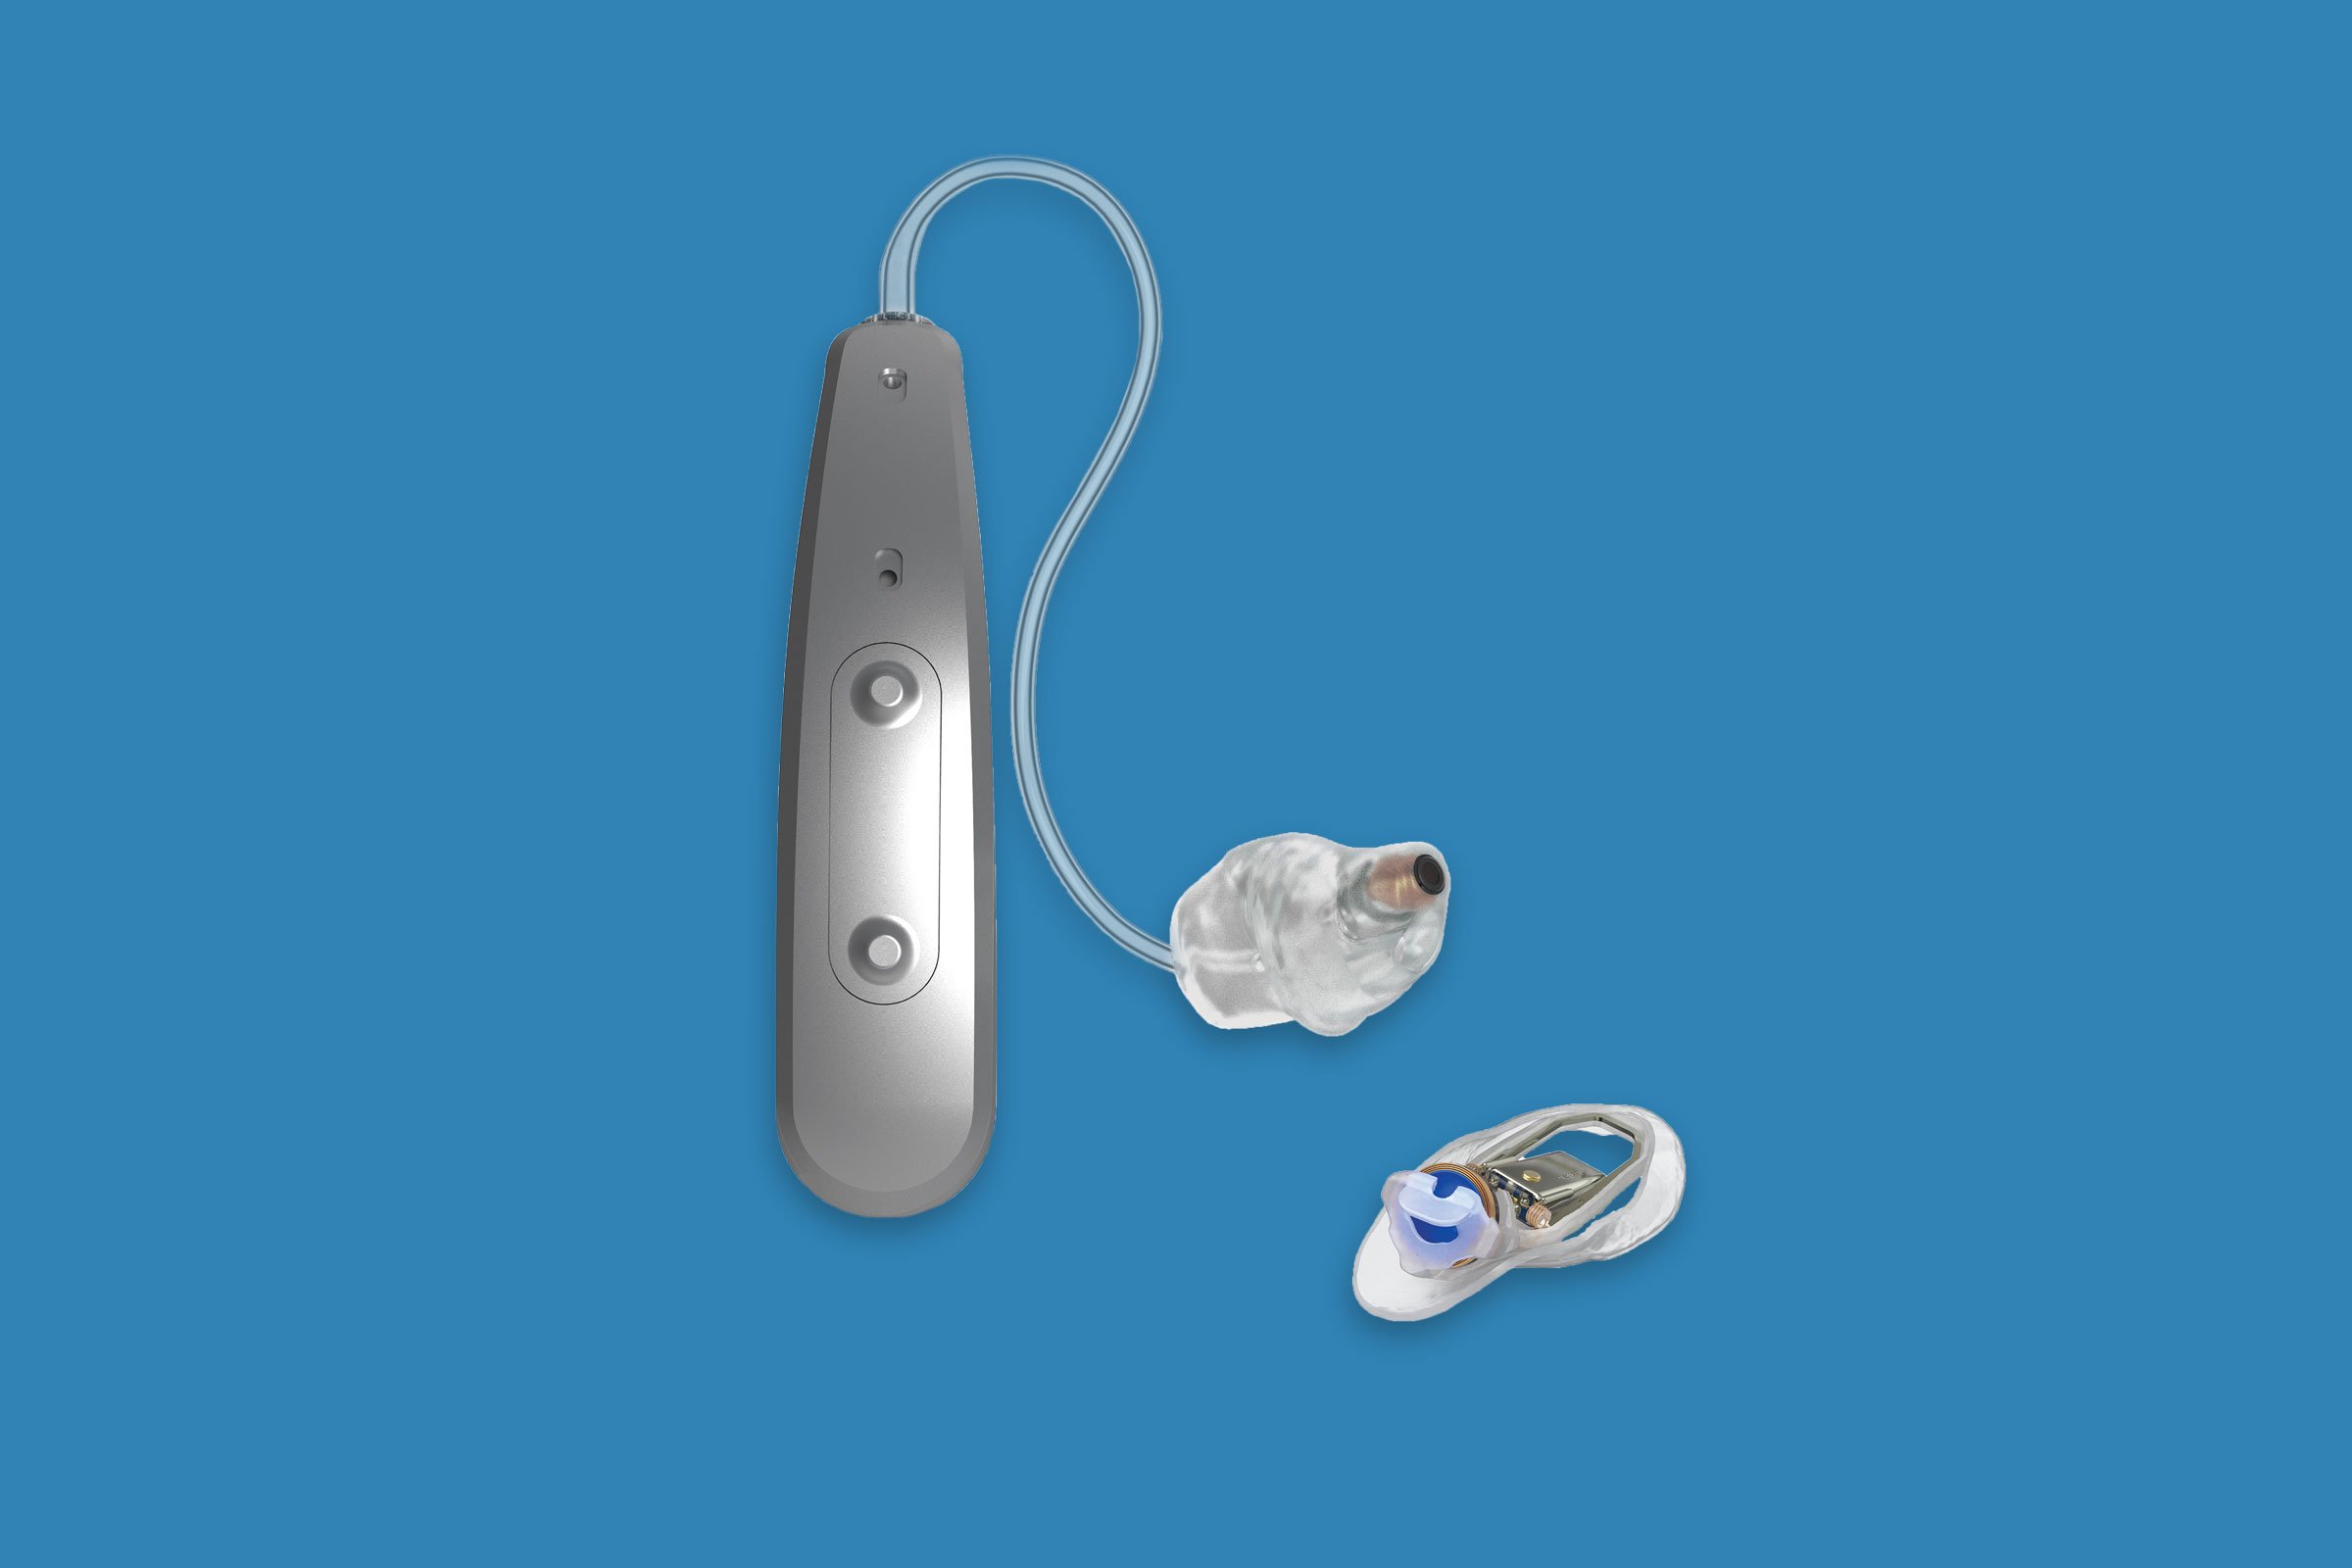 Earlens Contact Hearing Solution: The 100 Best Inventions of 2020